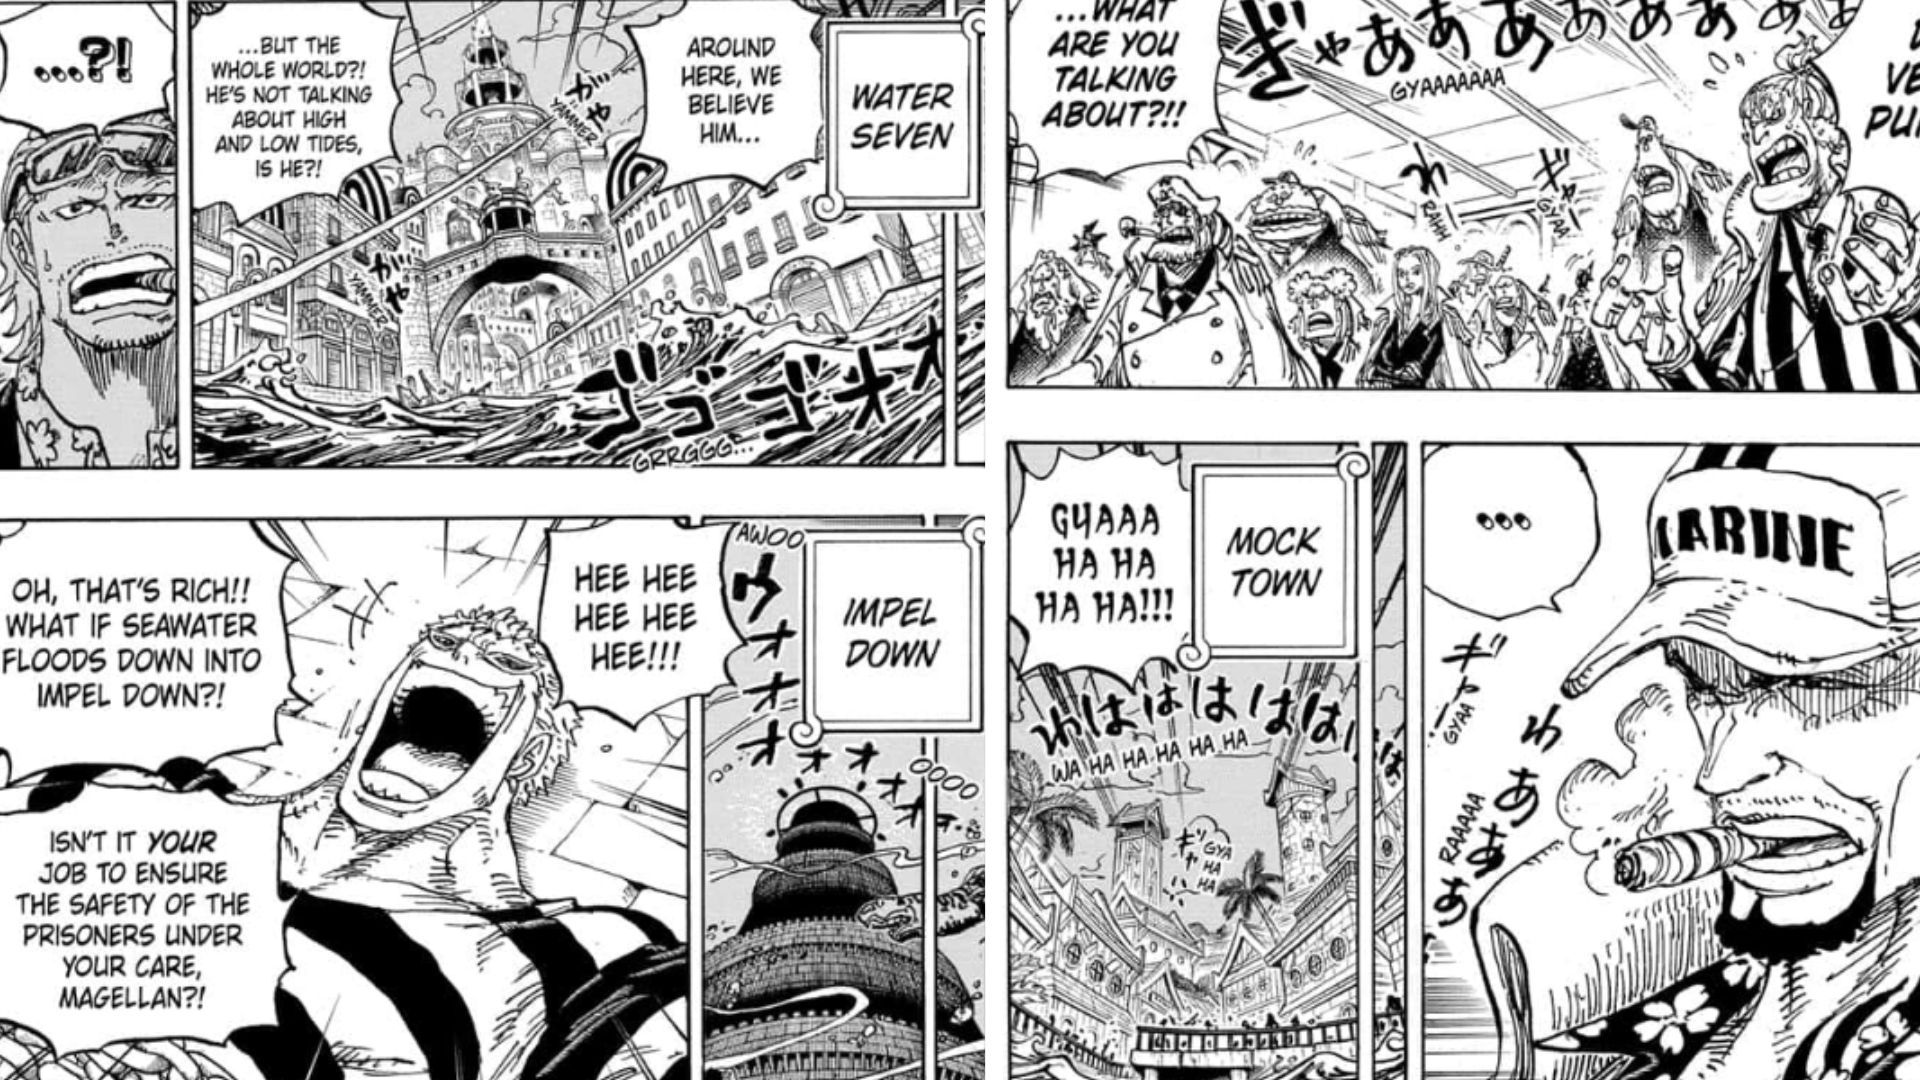 A panel from One Piece chapter #1114 showcasing reaction to Vegapunk's message